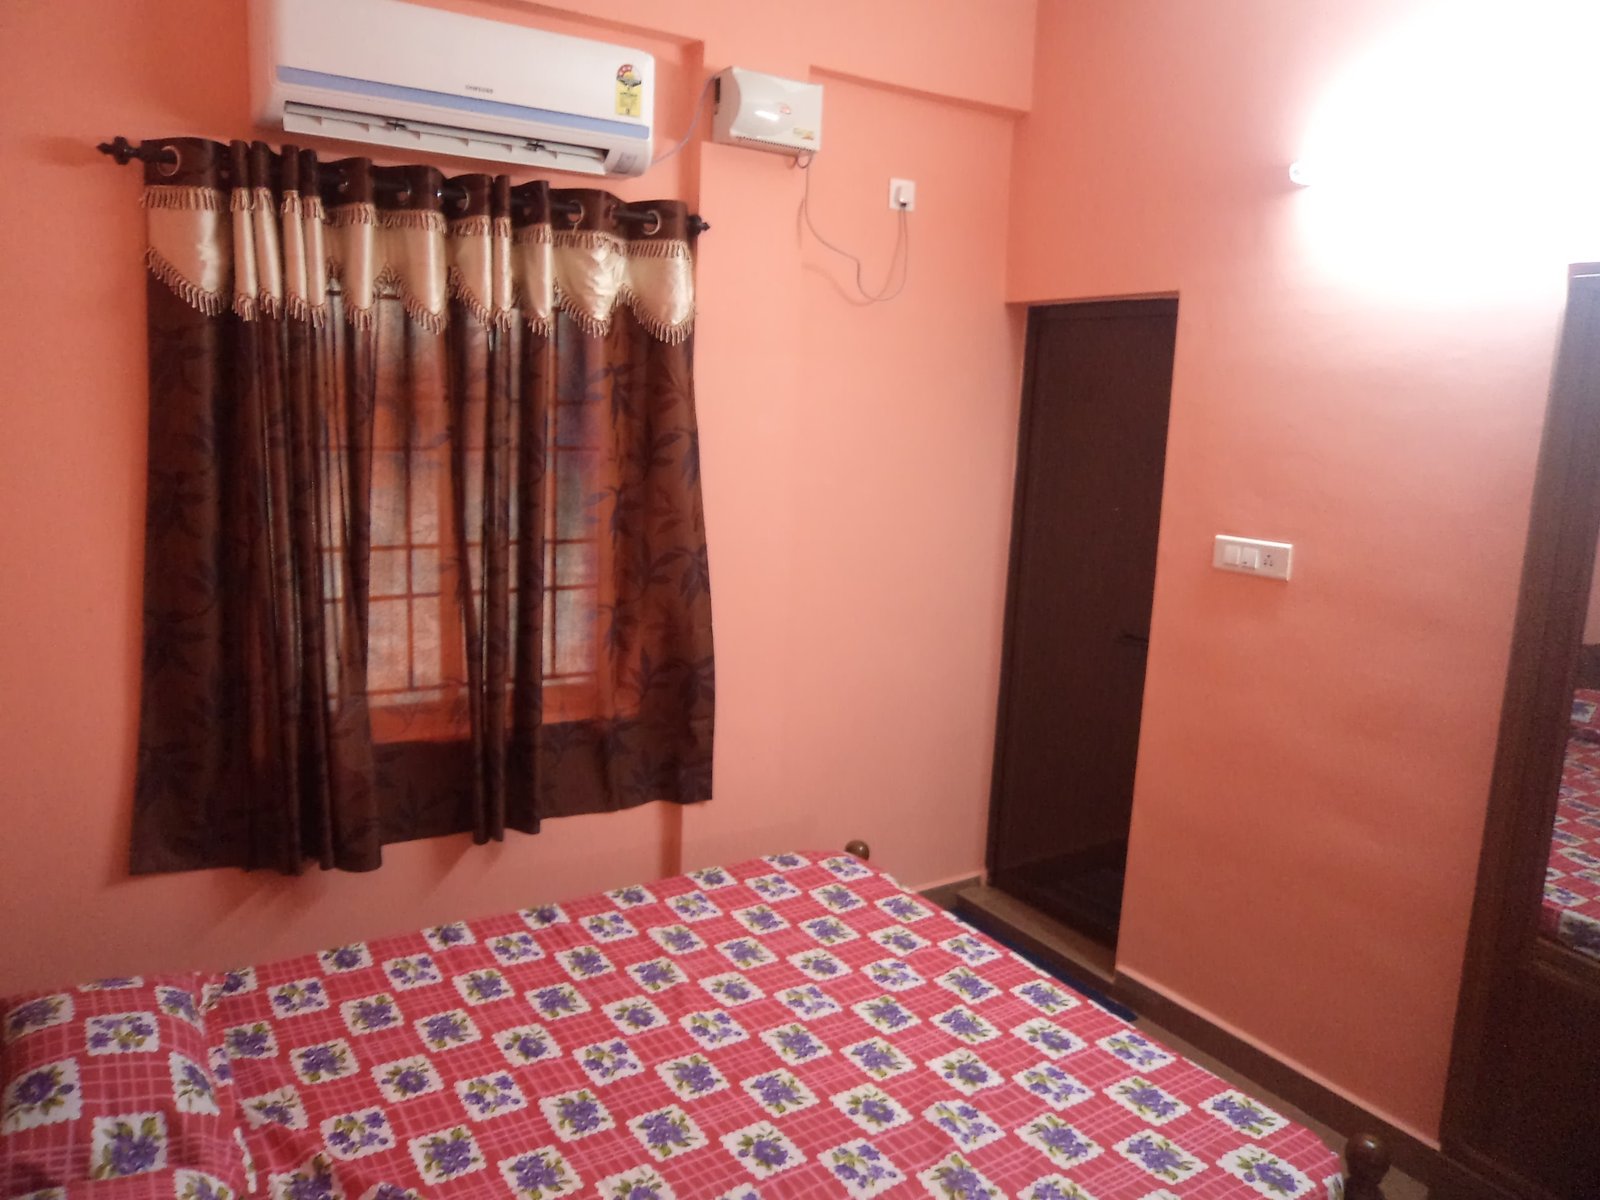 3 bedroom furnished apartment for one month rent in kottayam